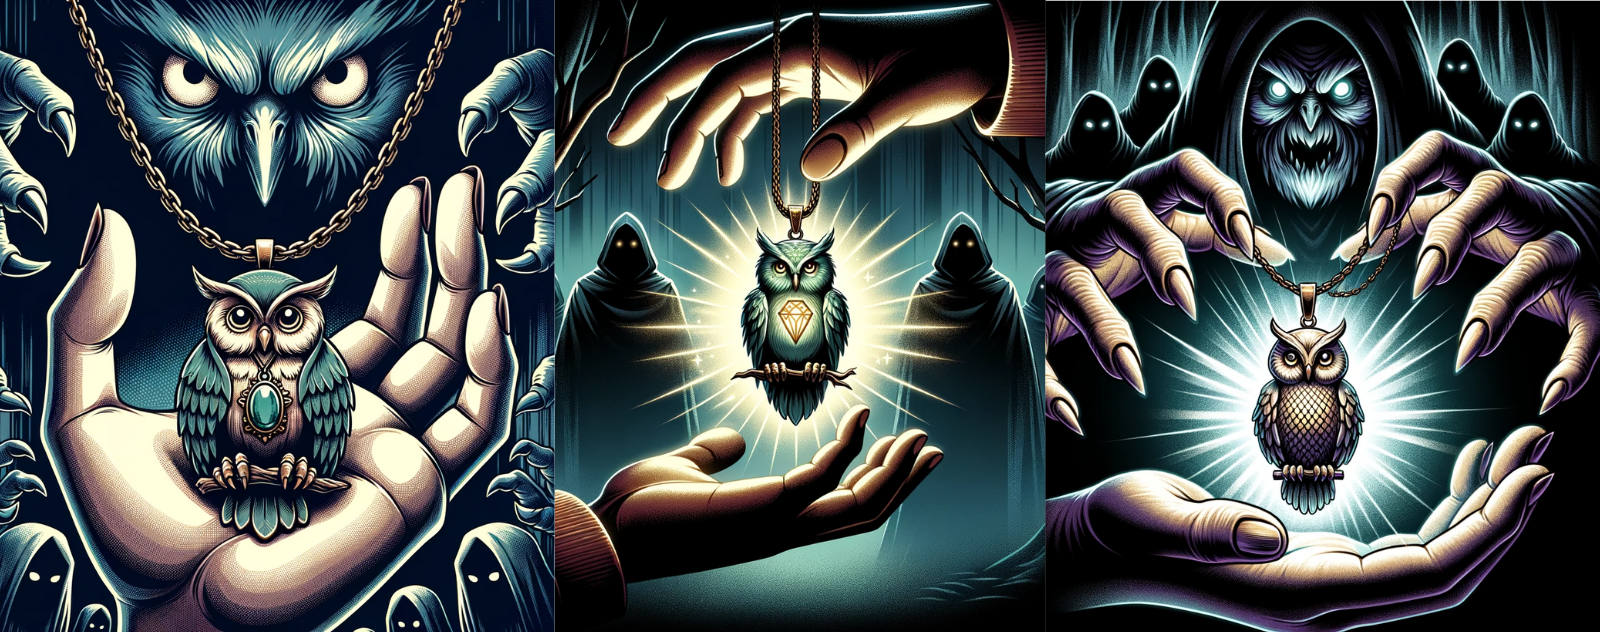 An illustration of a hand grasping an owl necklace, with the pendant emitting a protective aura against looming shadowy figures.